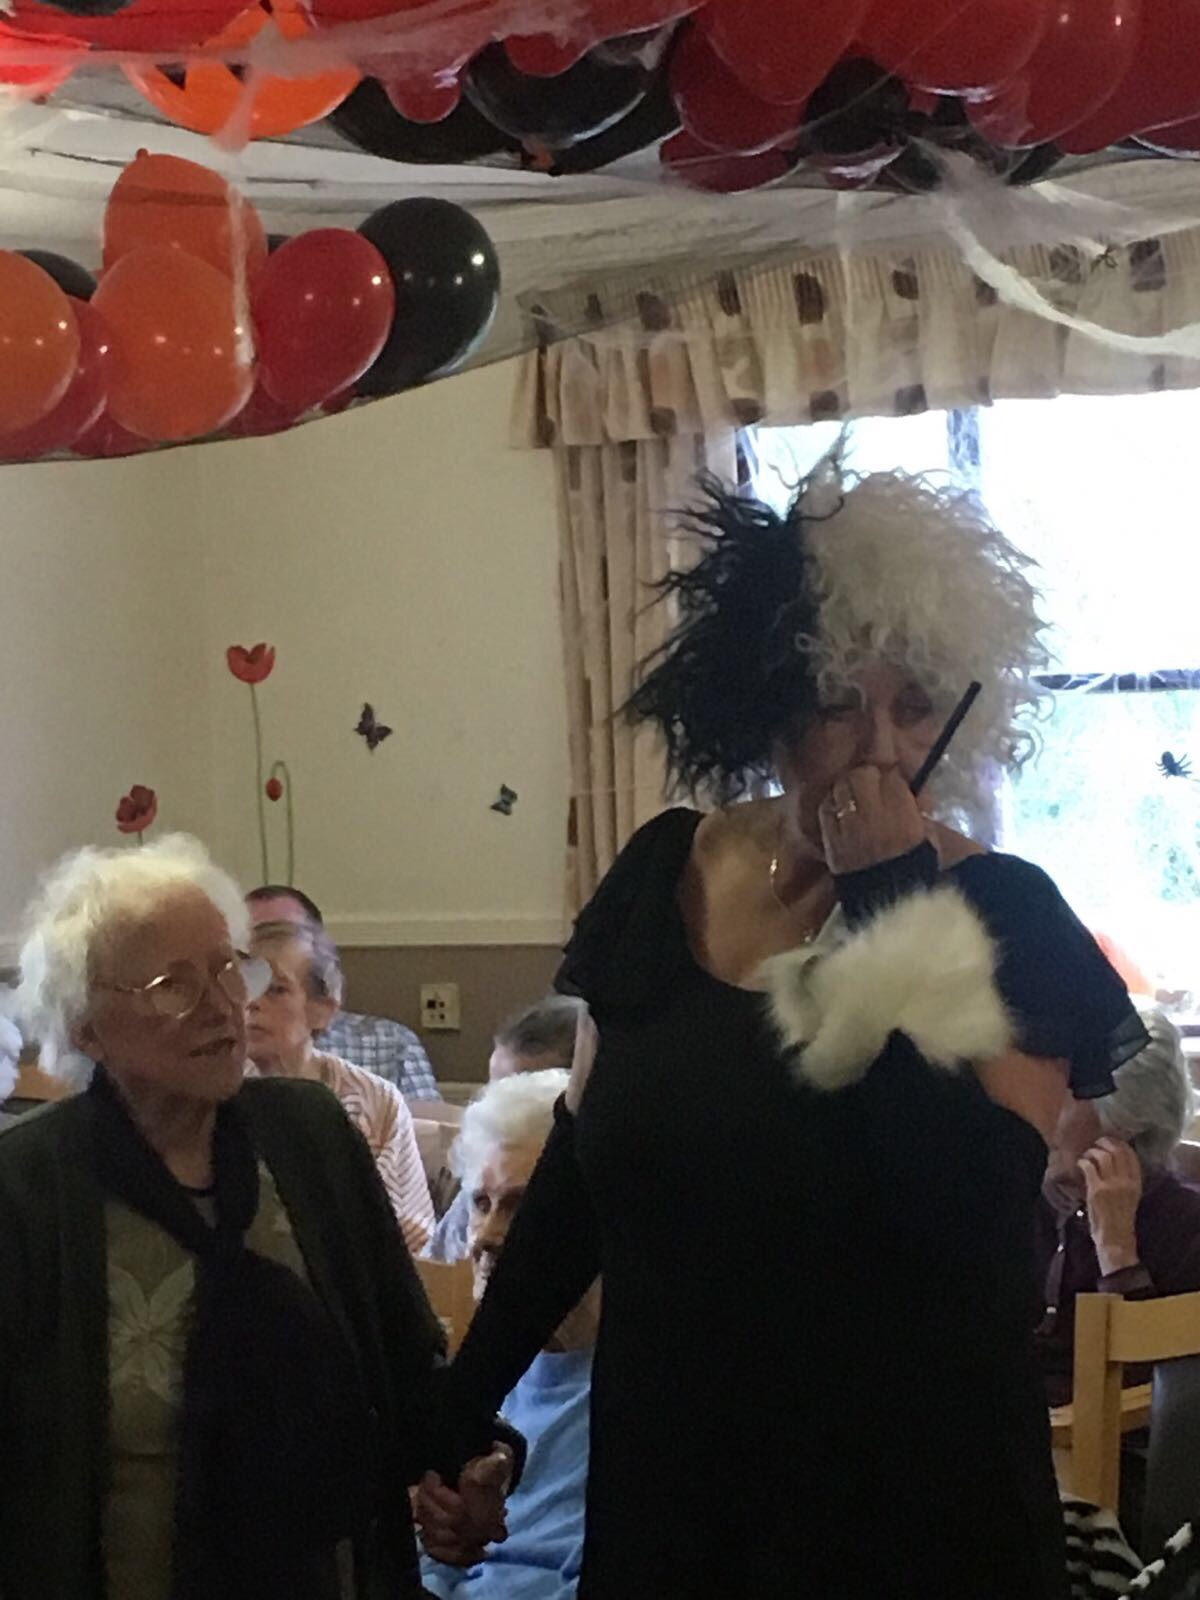 Cruella!: Key Healthcare is dedicated to caring for elderly residents in safe. We have multiple dementia care homes including our care home middlesbrough, our care home St. Helen and care home saltburn. We excel in monitoring and improving care levels.